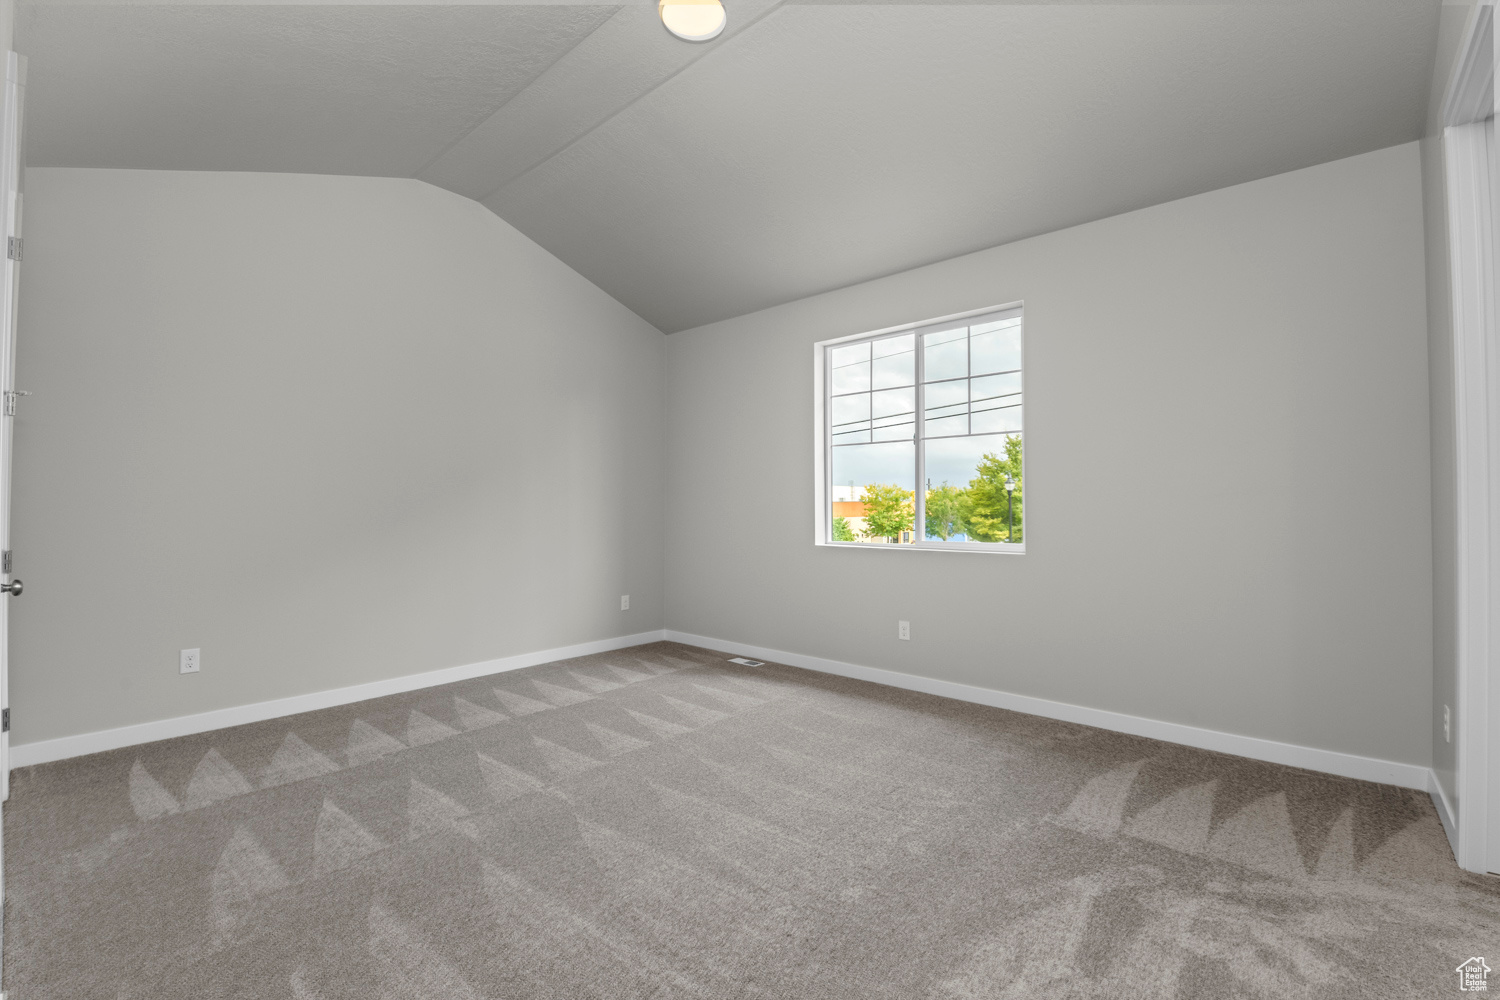 Carpeted empty room featuring vaulted ceiling